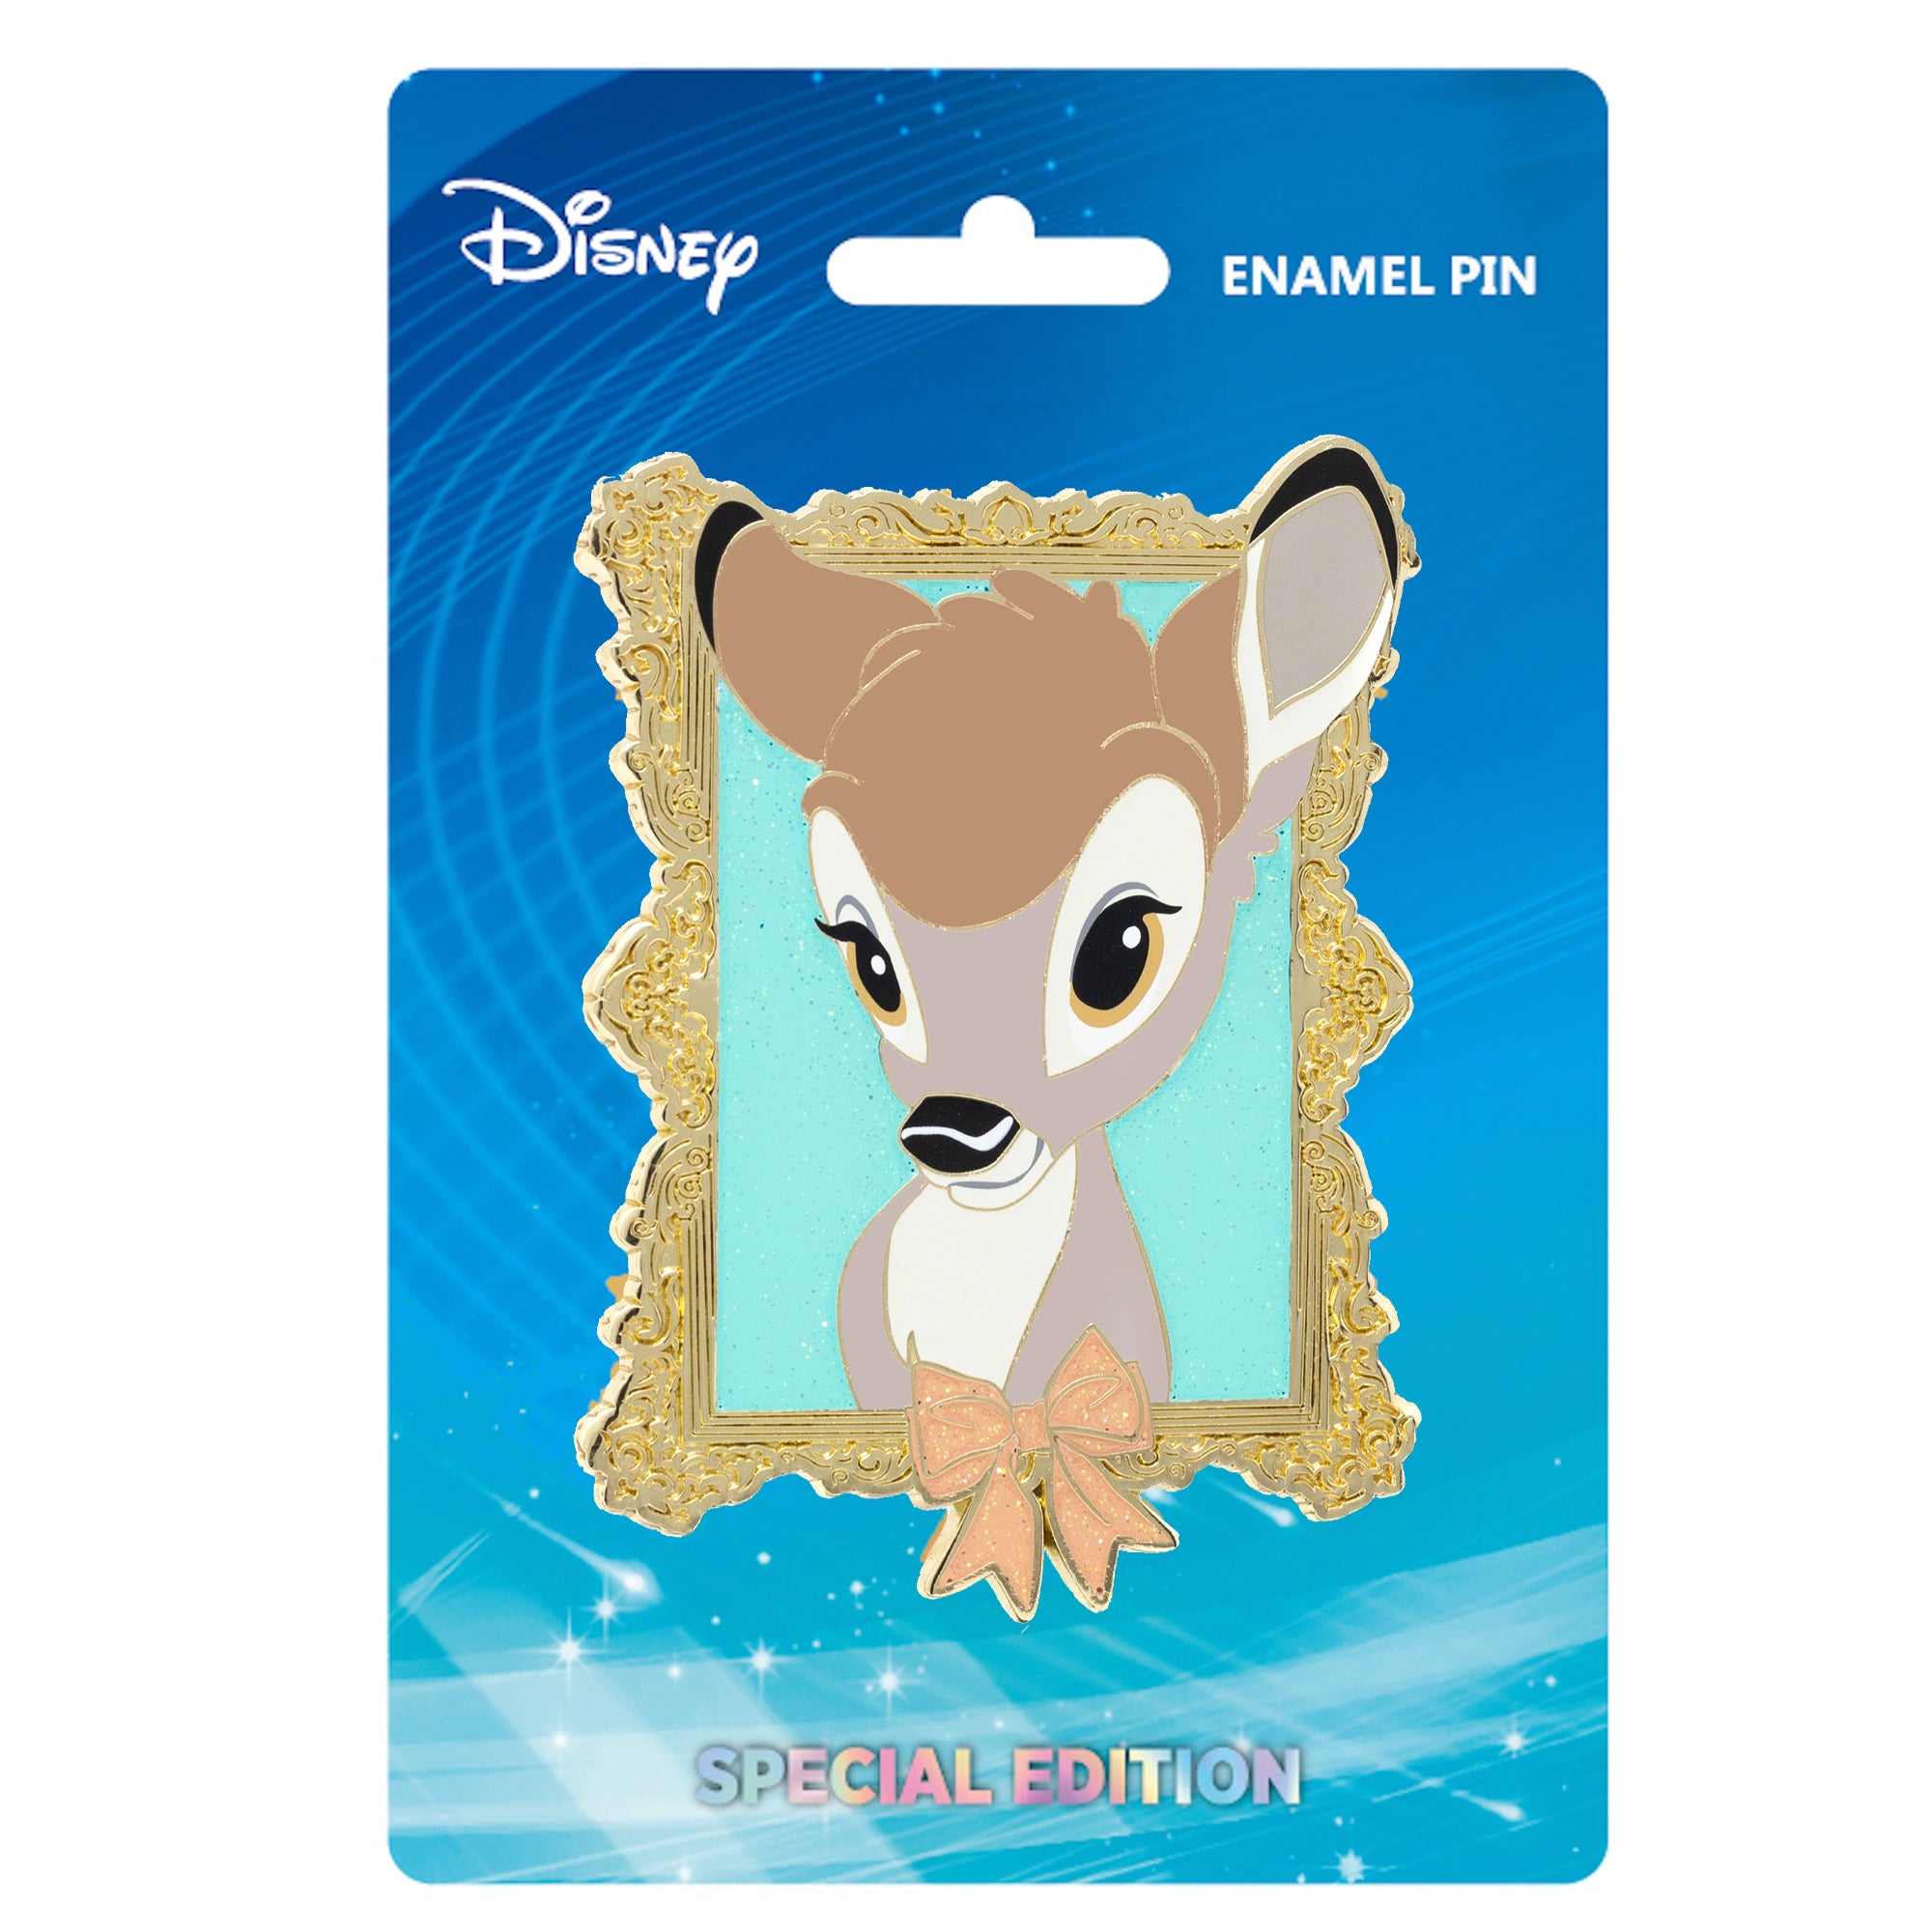 Disney Bambi Book Hinged Pin | Officially Licensed | Enamel